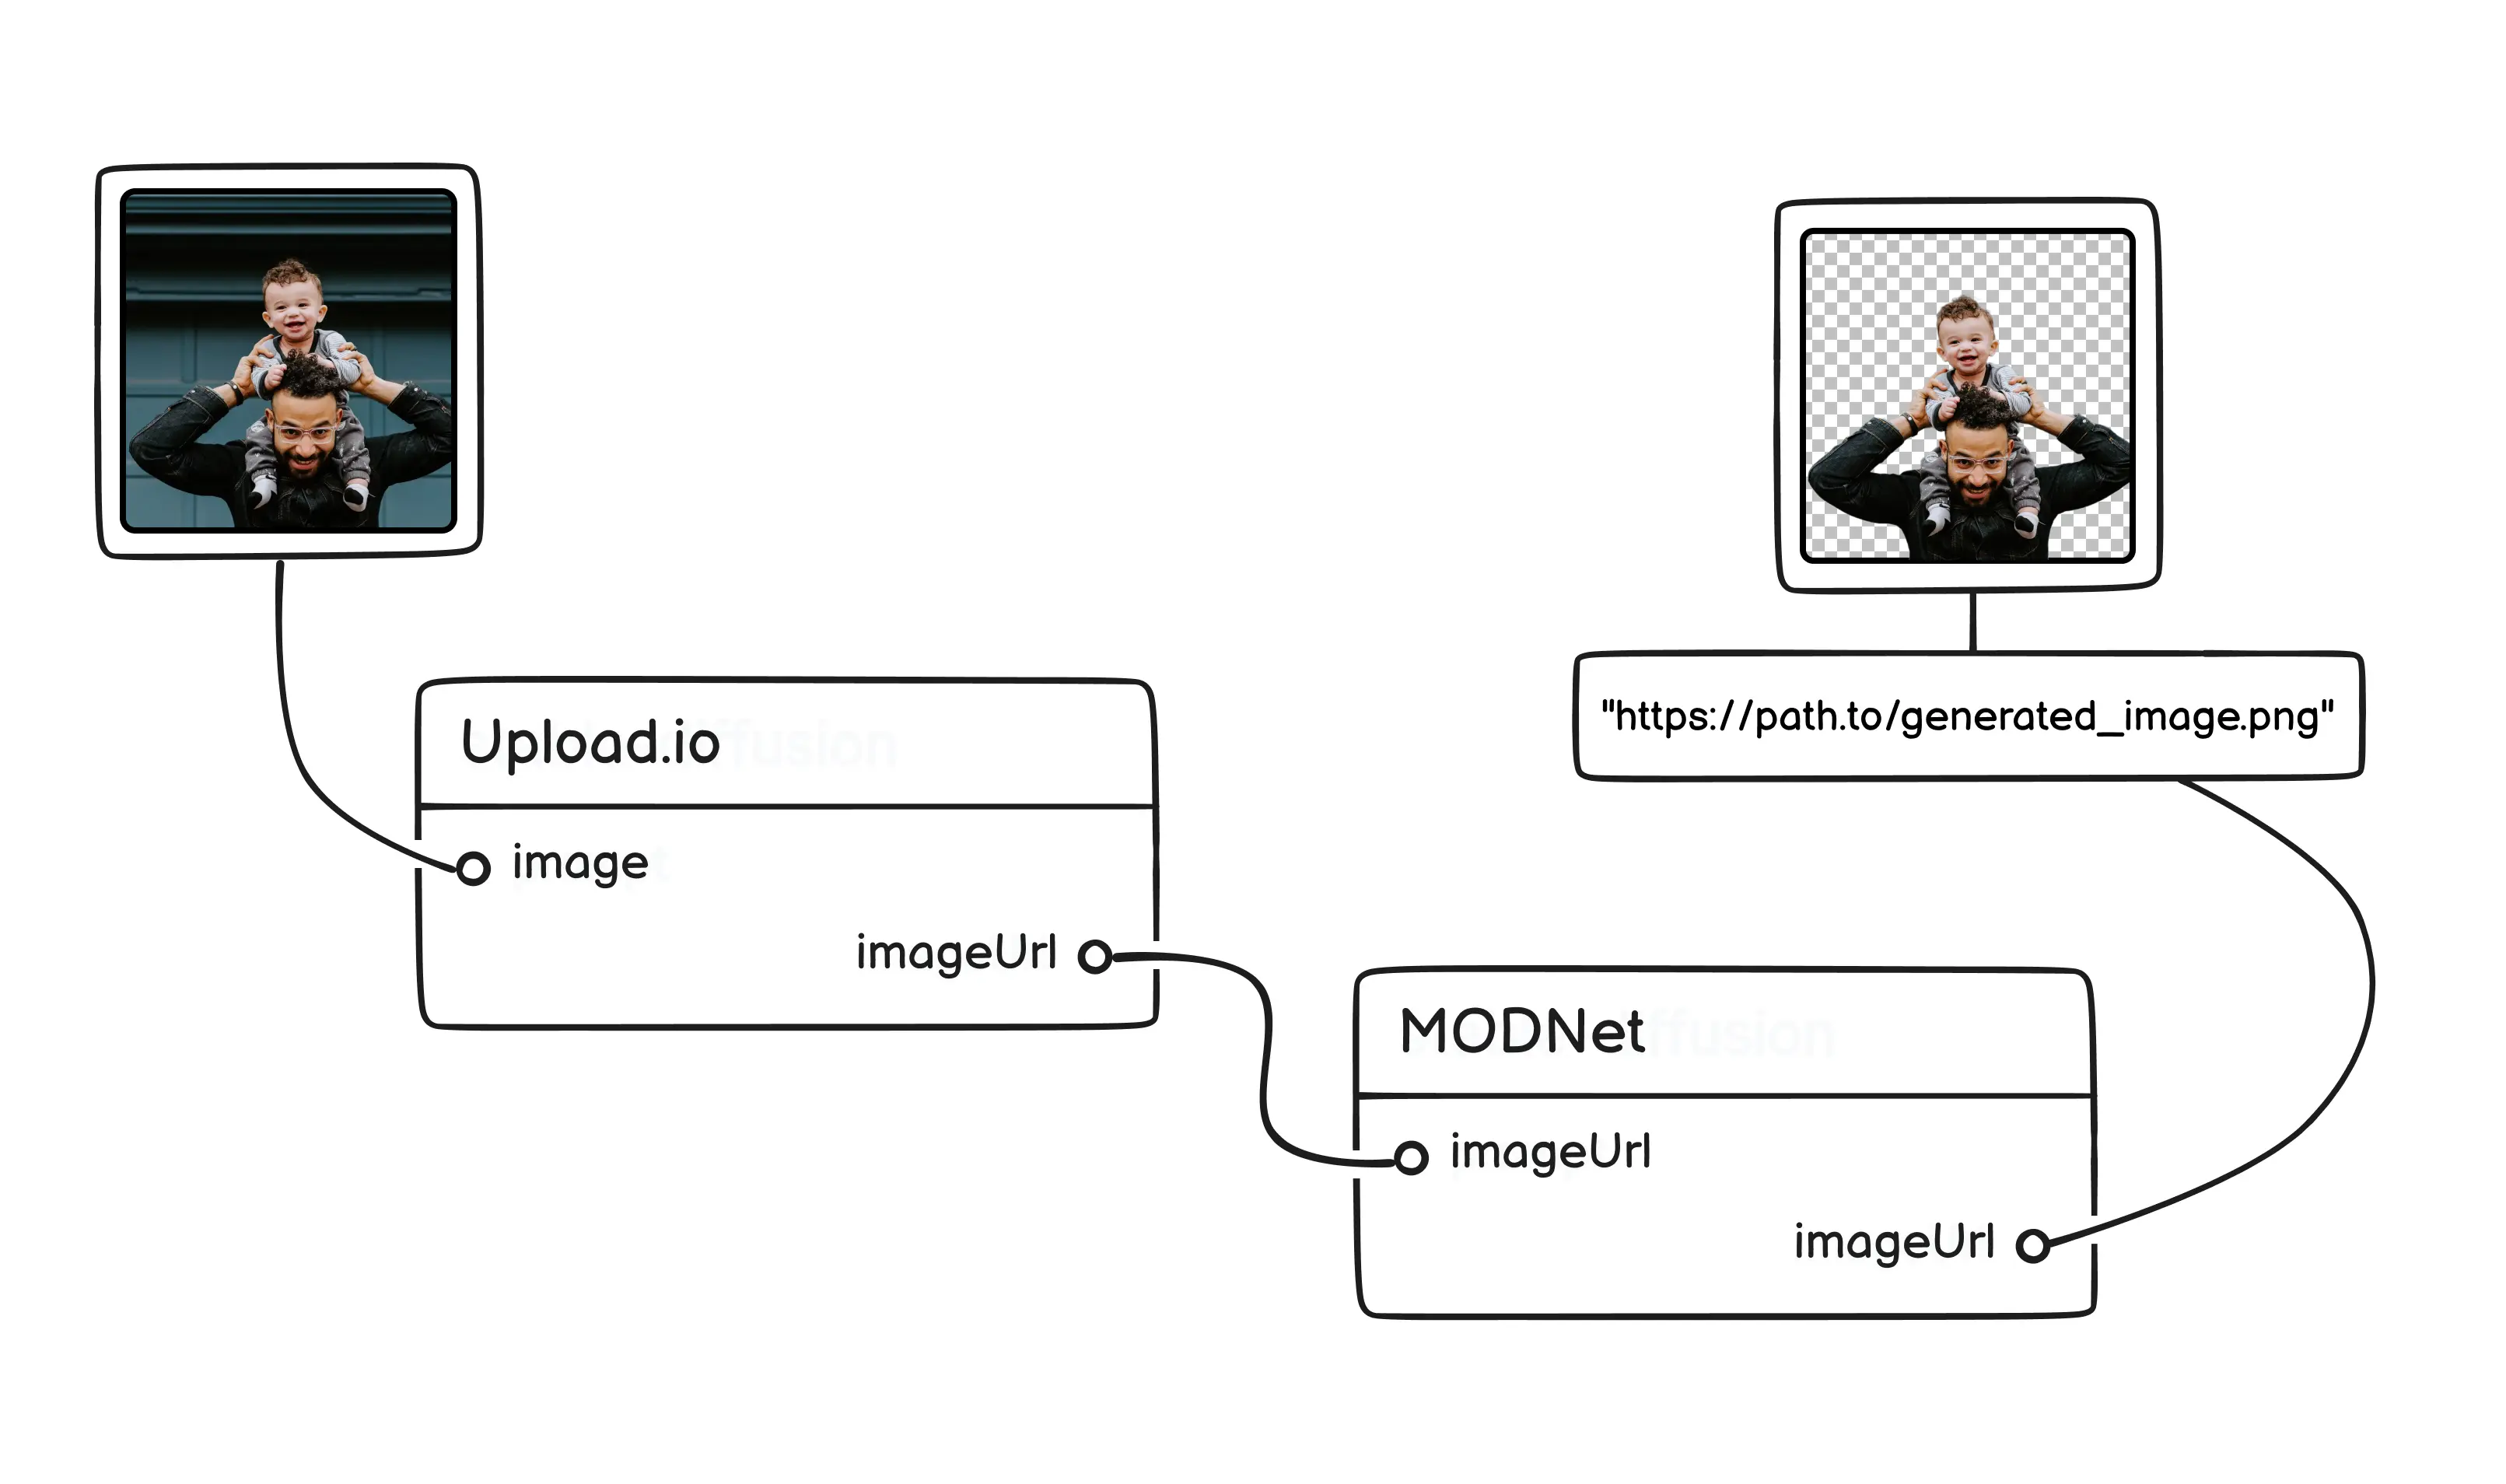 Simplified input/output diagram of MODNet model and Upload.io.